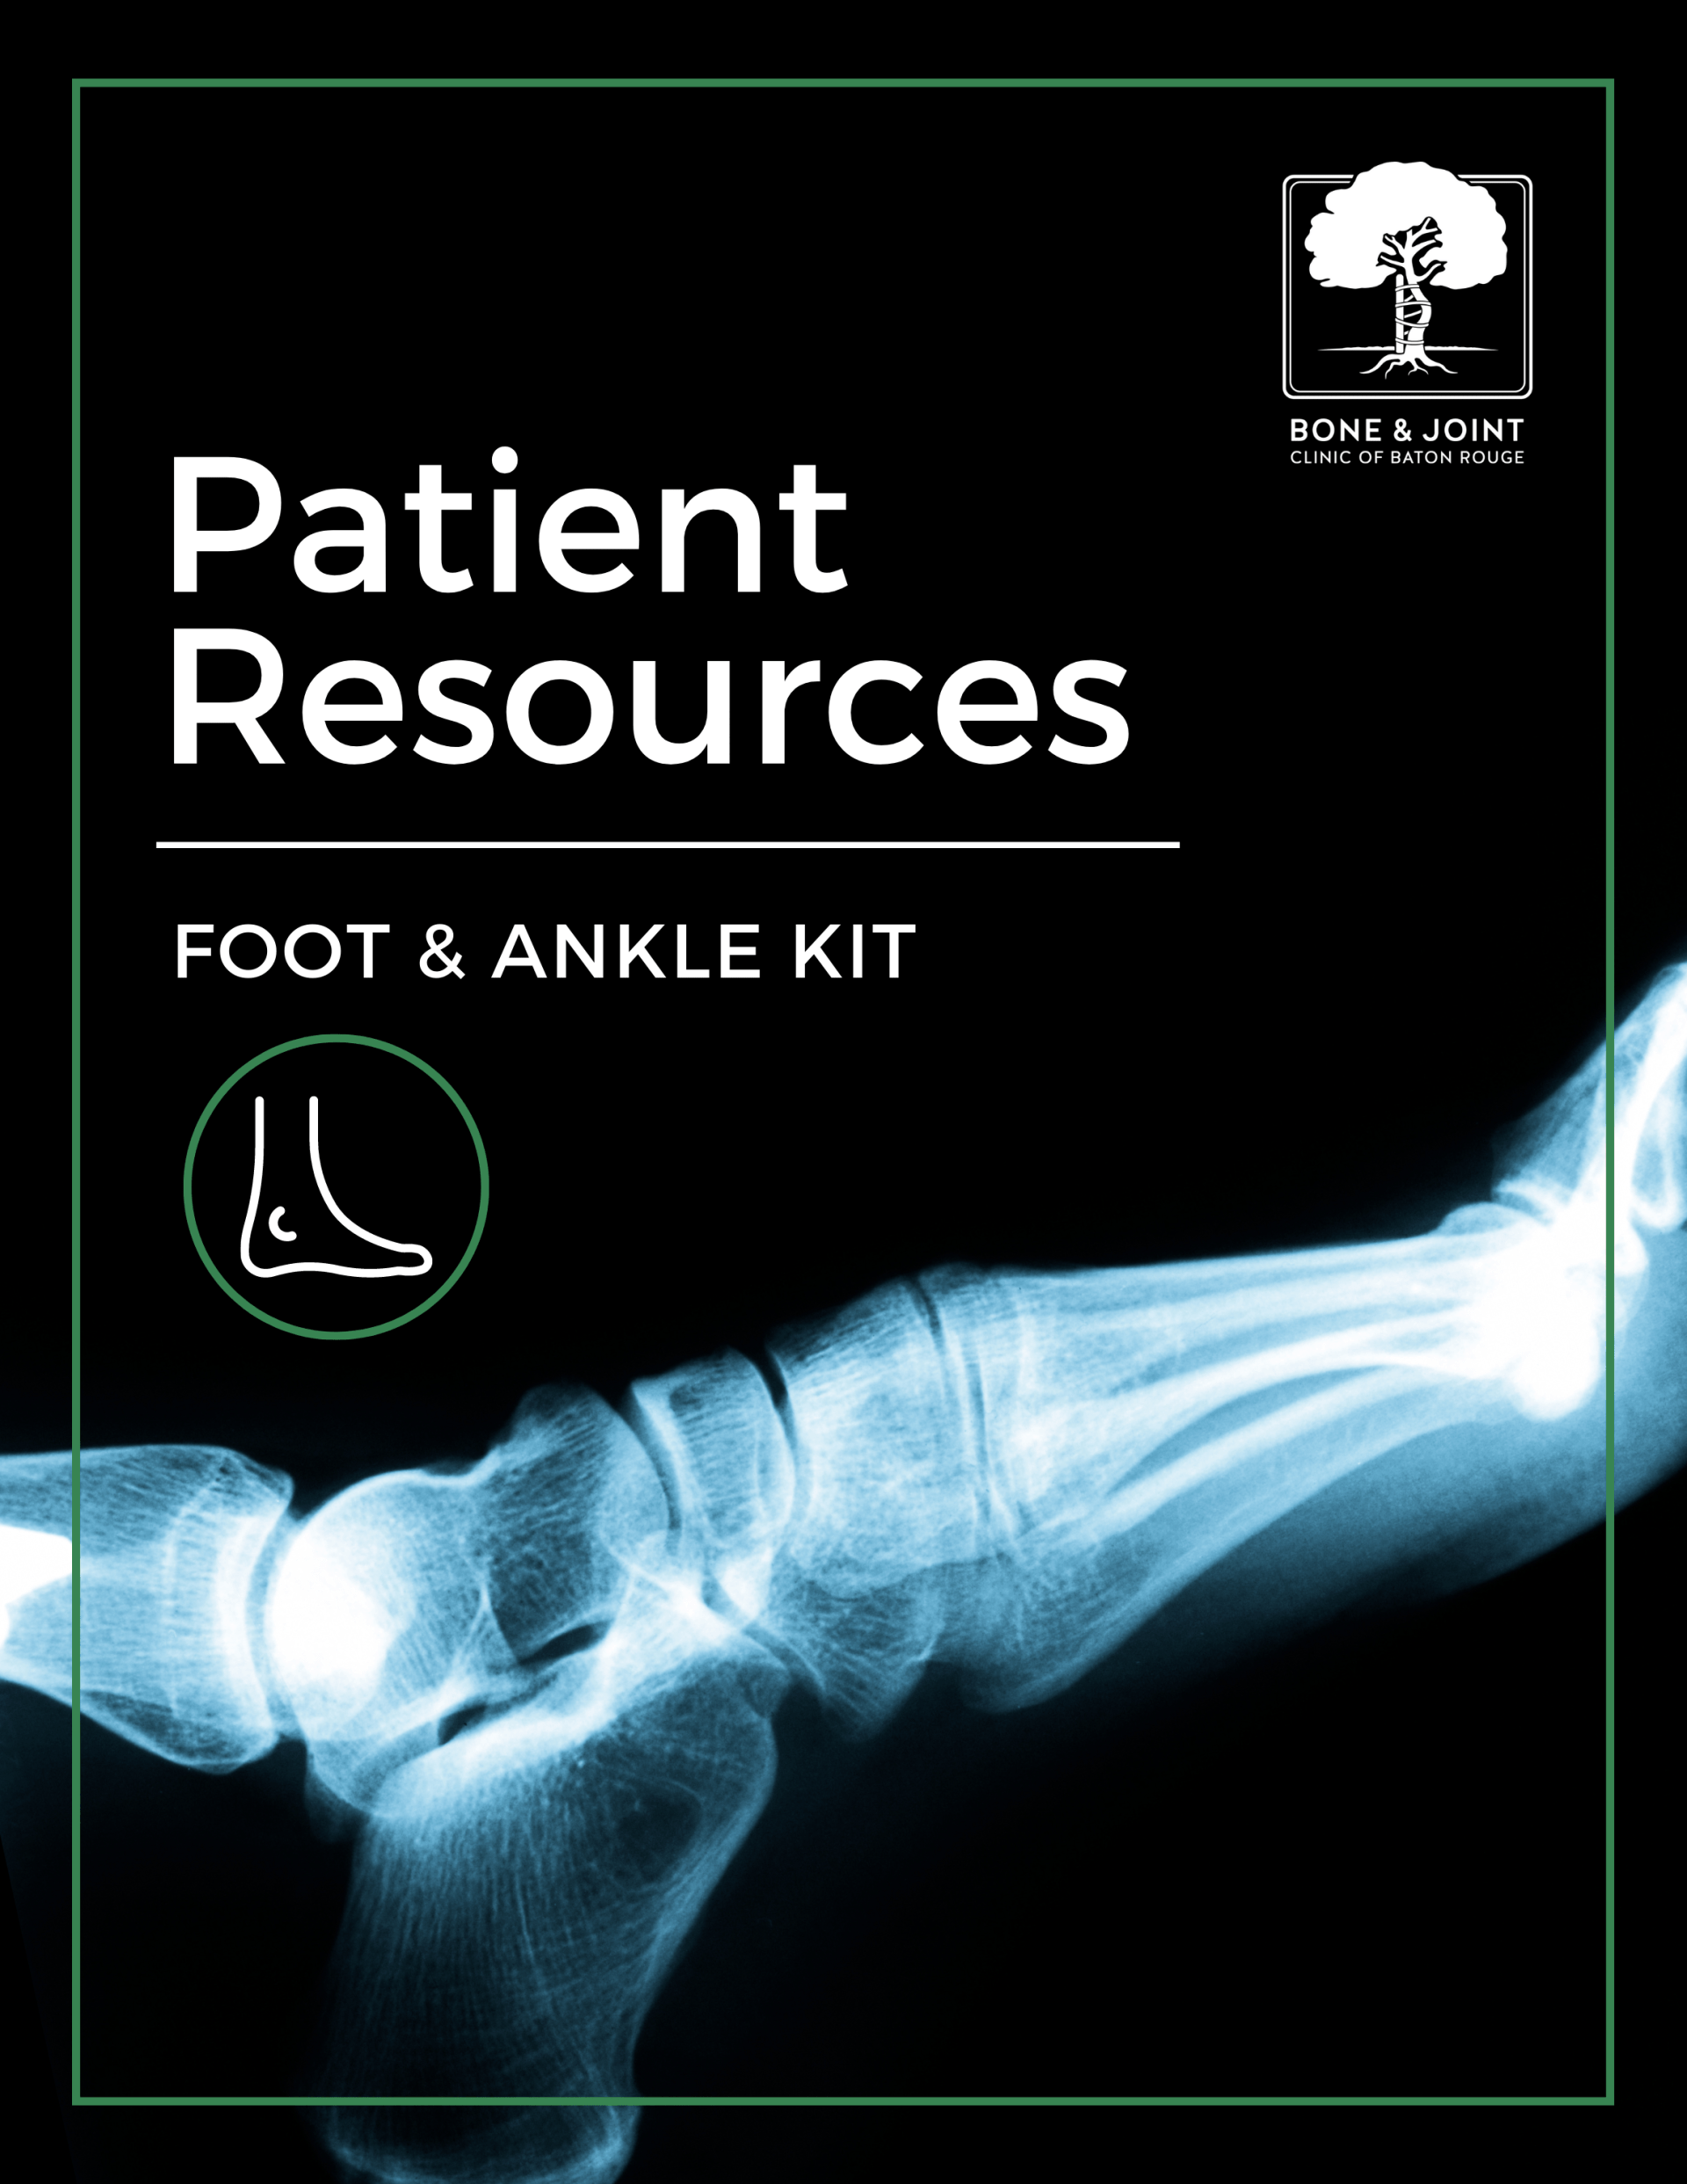 foot and ankle patient resources